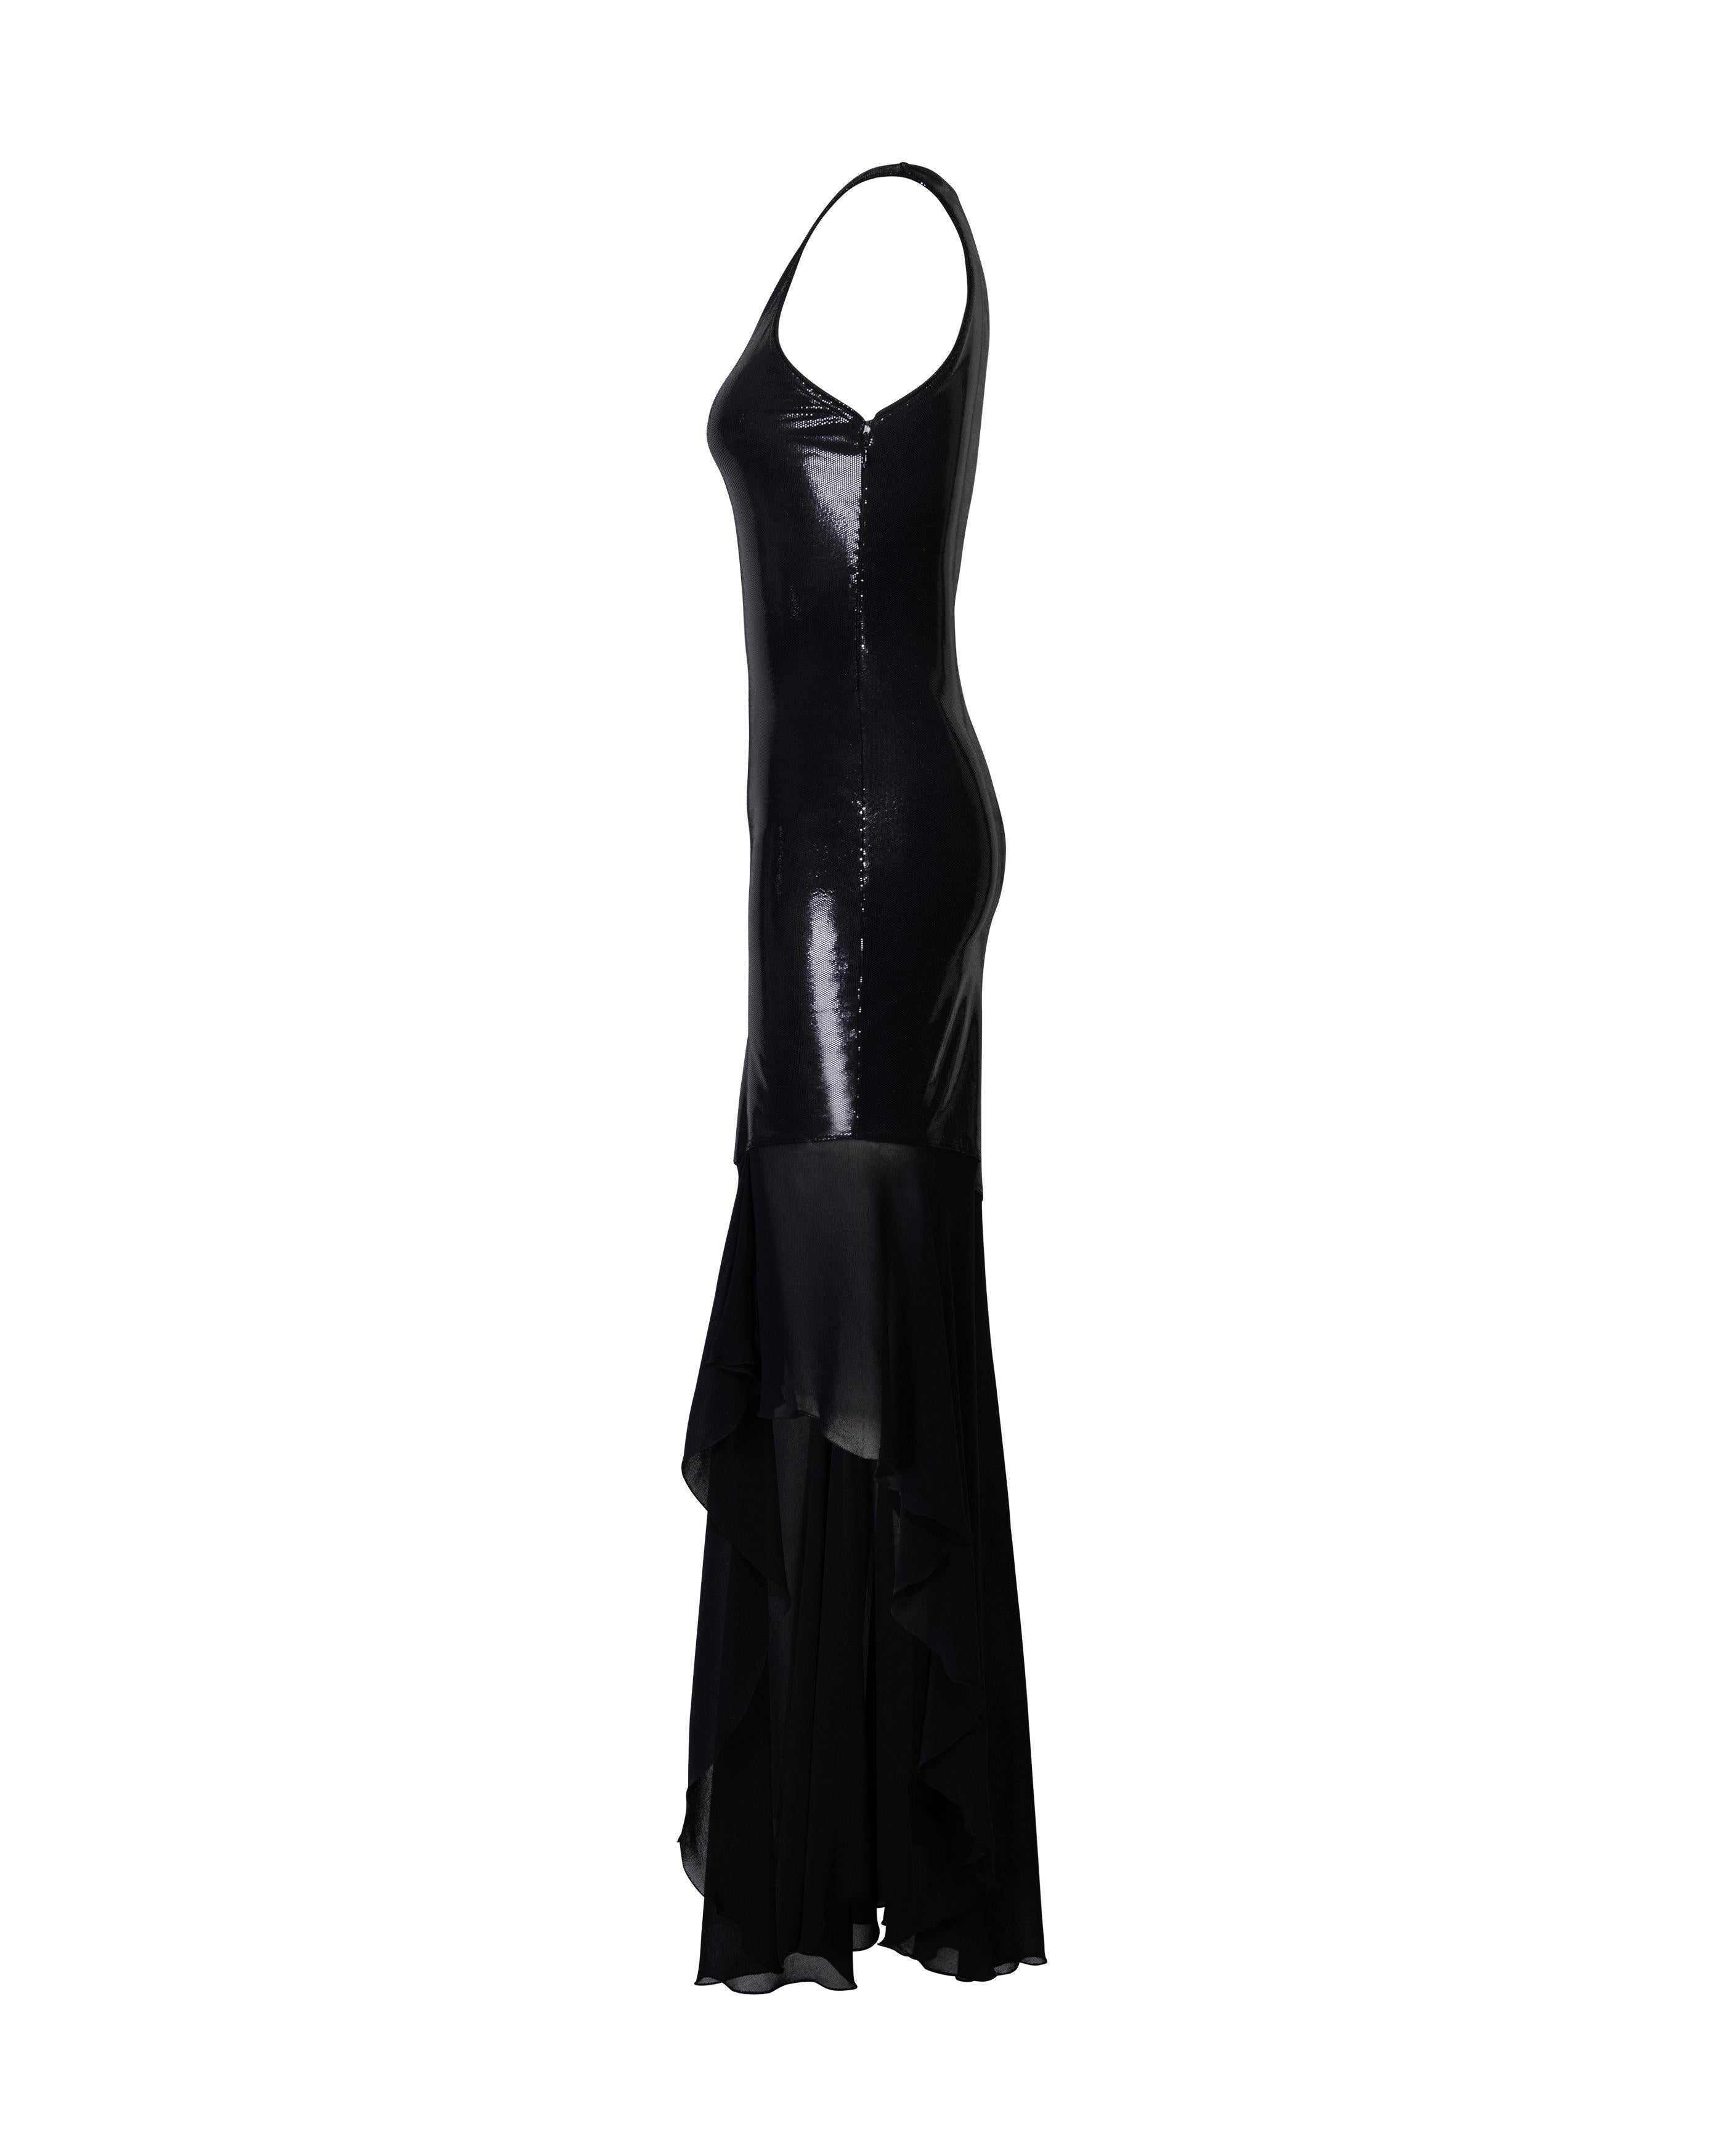 1990's Istante by Versace metallic black faux snakeskin gown with semi-sheer silk chiffon asymmetrical hemline. Sleeveless v-neck fitted stretch jersey gown (moderate stretch) with silver-black faux snakeskin pattern throughout. Concealed side zip